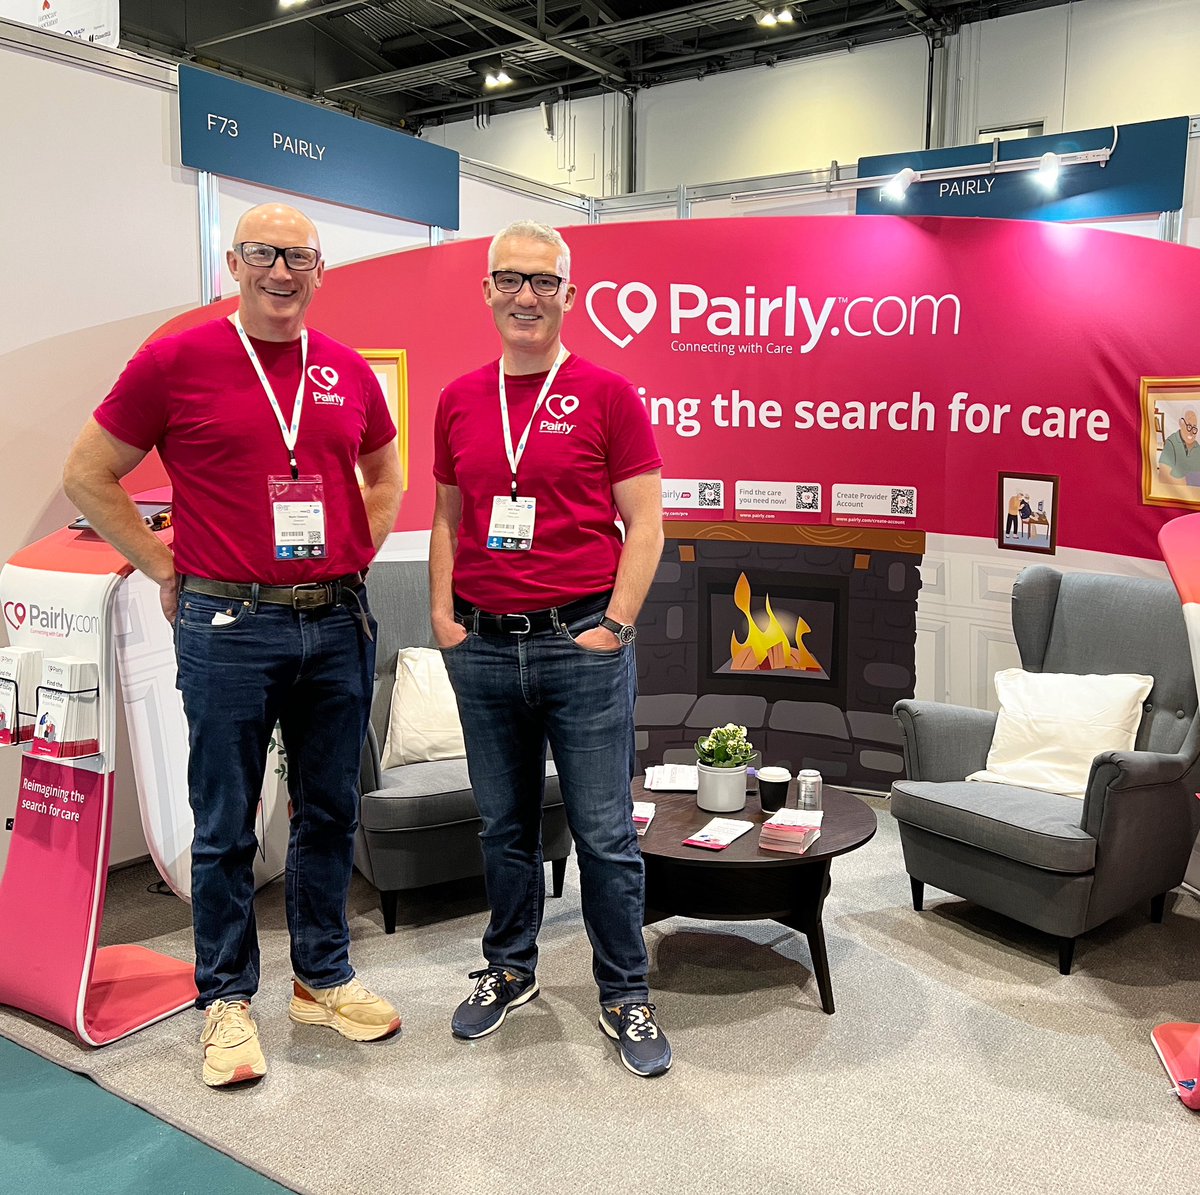 Our co-creators, Will and Mark are happy to be at the @ResHomeCareShow at @excellondon. 

Come to F73 and find out how Pairly is reimagining the search for care.
#healthpluscare #healthpluscareshow #carehome #careathome #residentialhome #careprovider